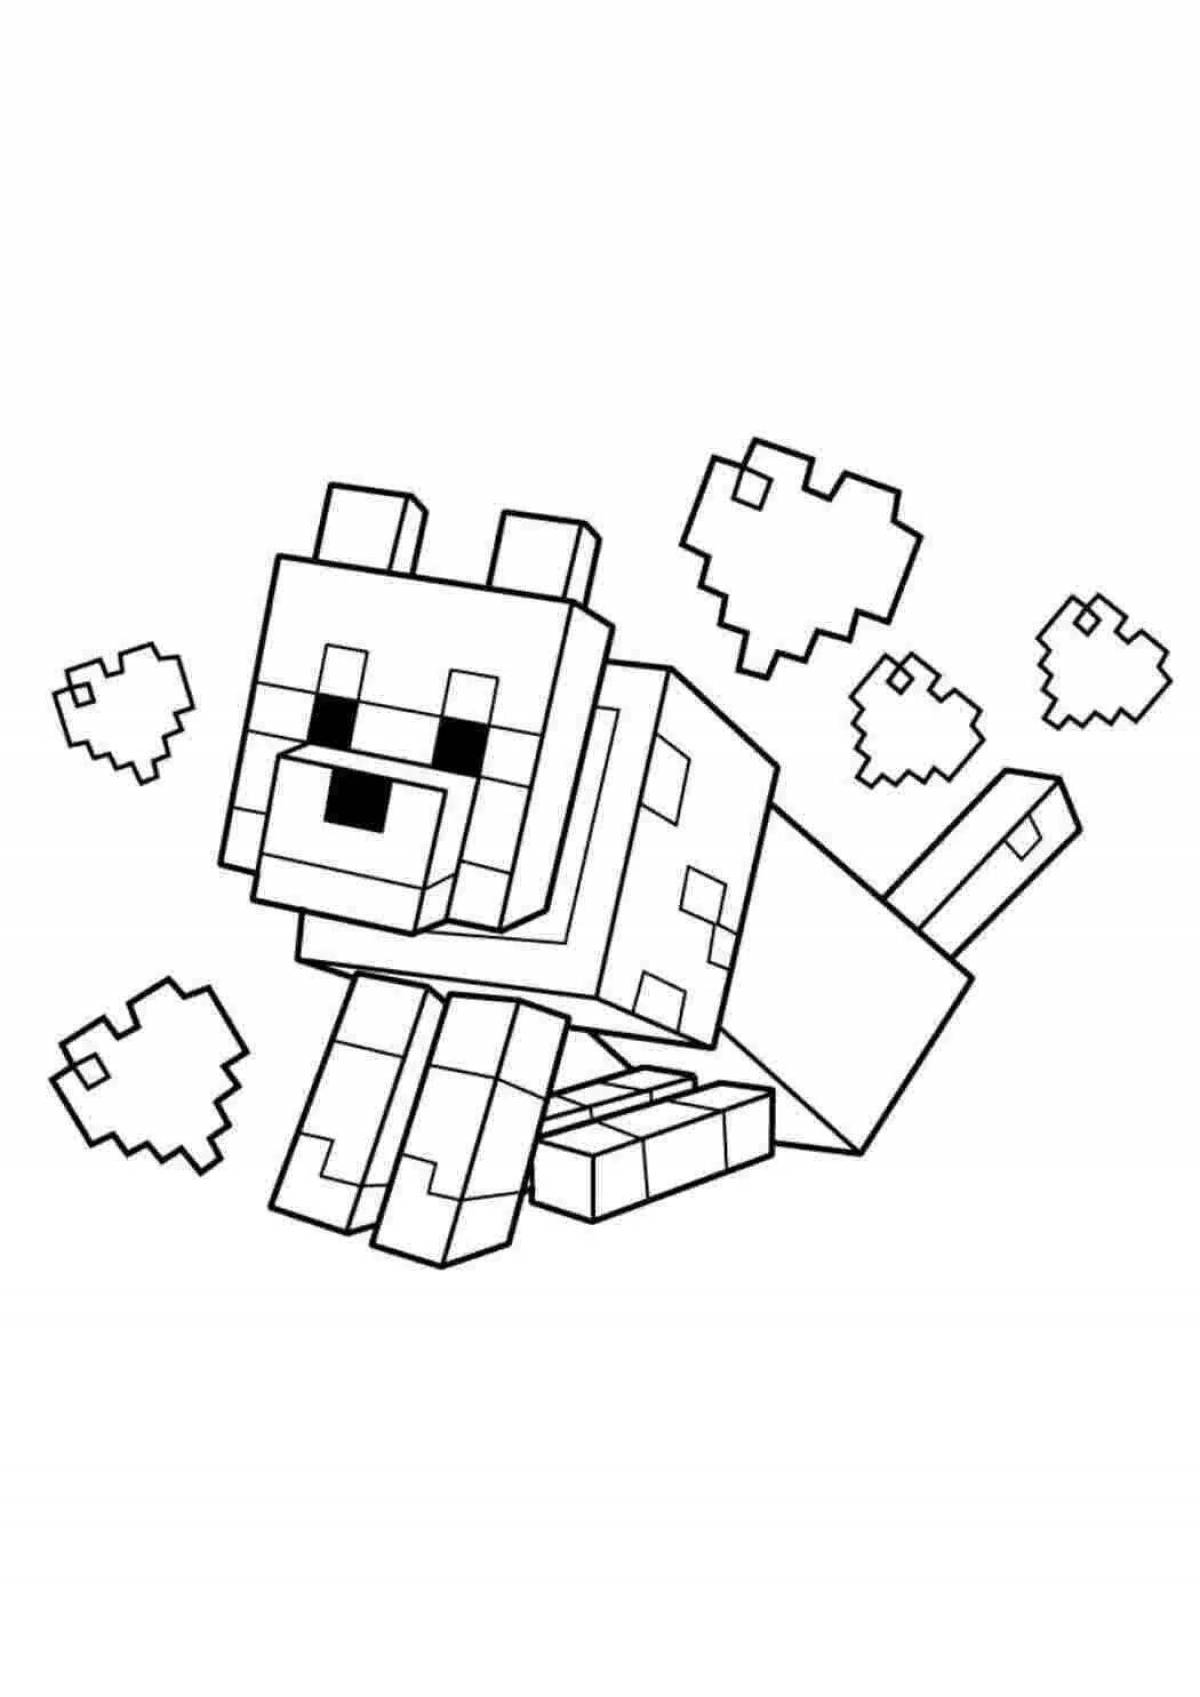 Humorous minecraft cake coloring page